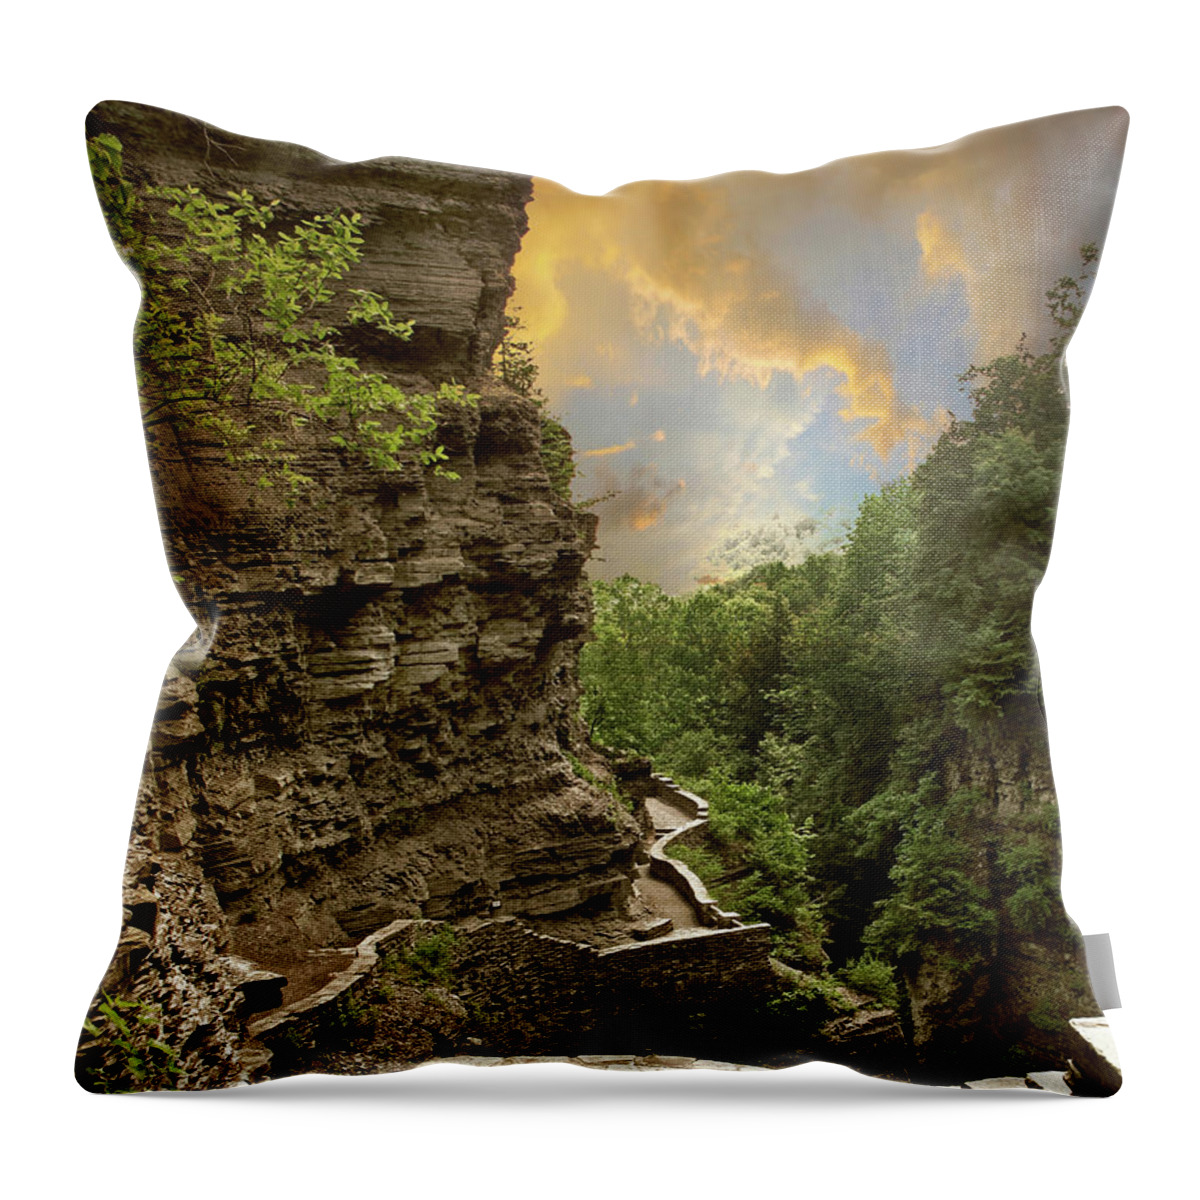 Nature Throw Pillow featuring the photograph The Winding Trail by Jessica Jenney